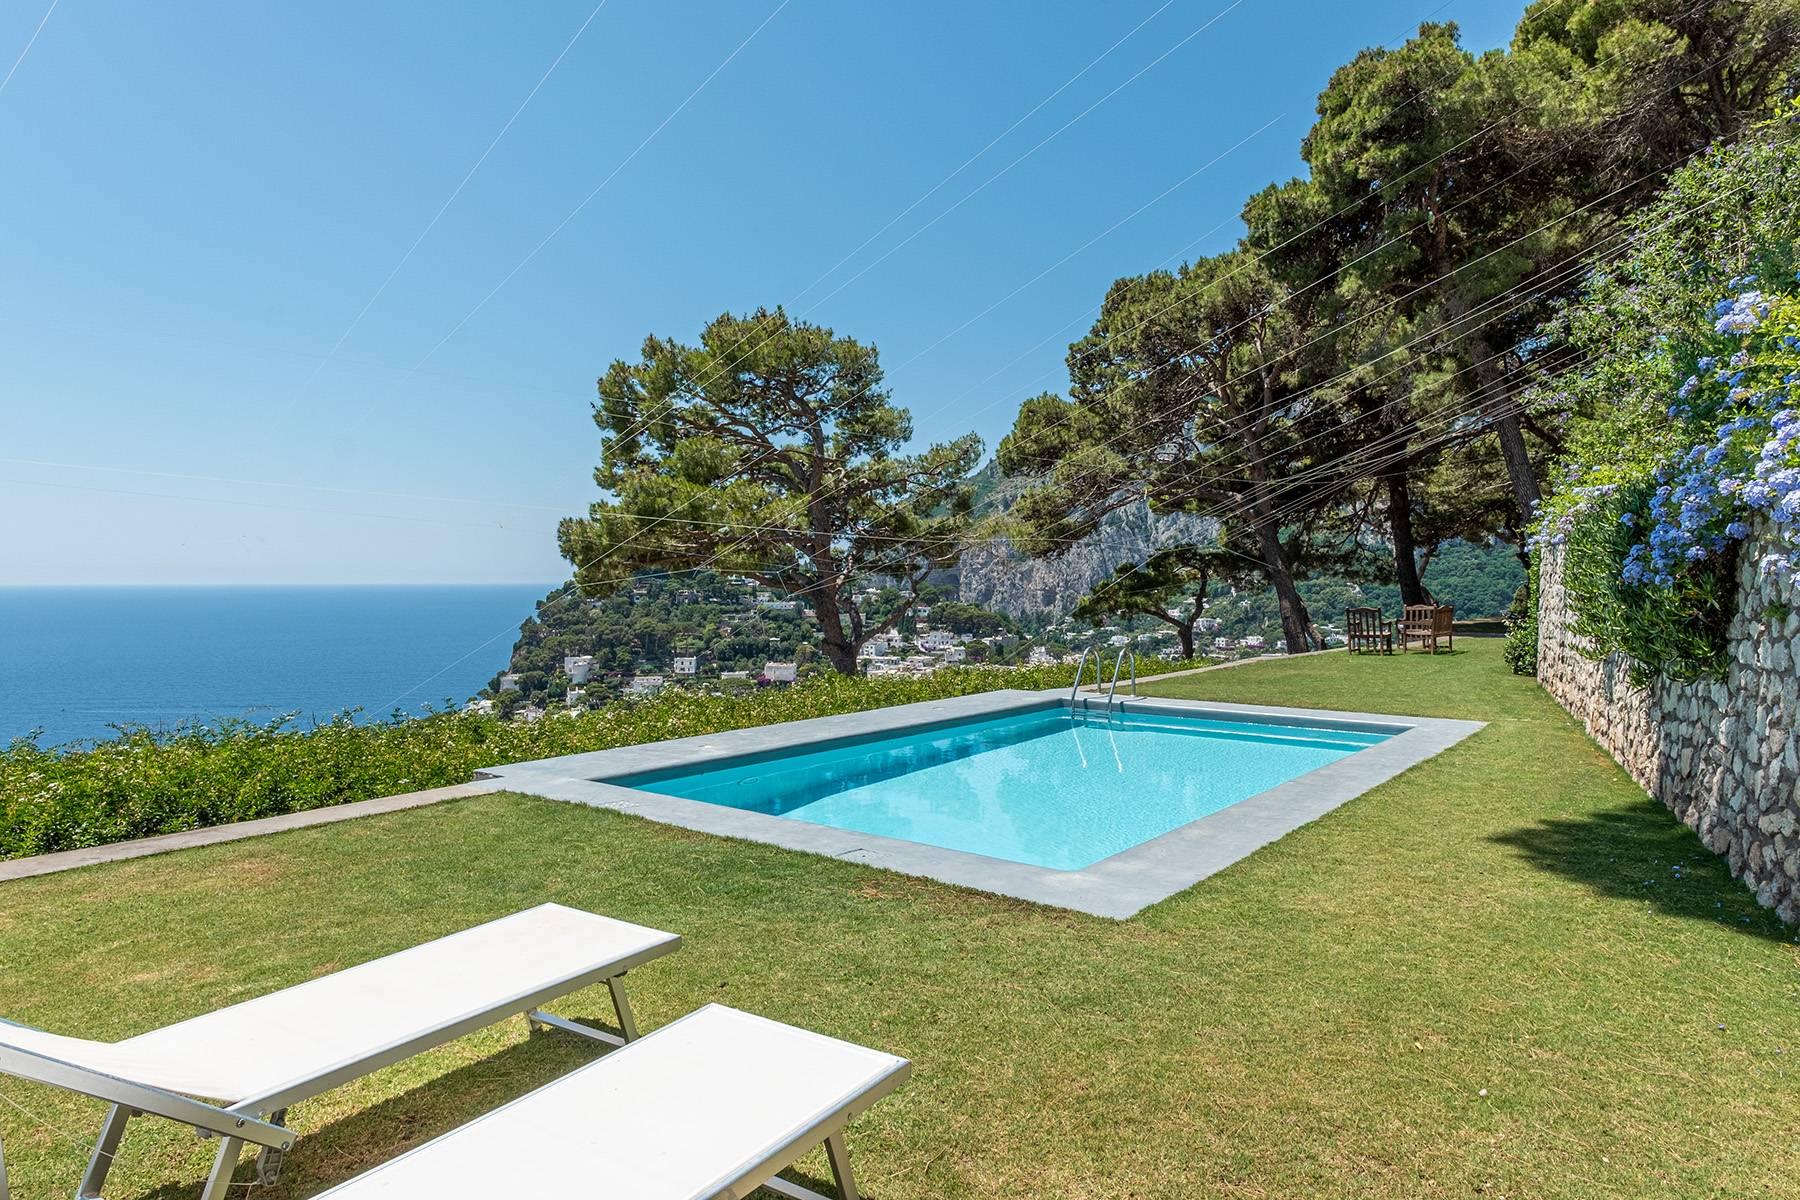 Stunning villa with swimming pool overlooking Capri and the sea - 7